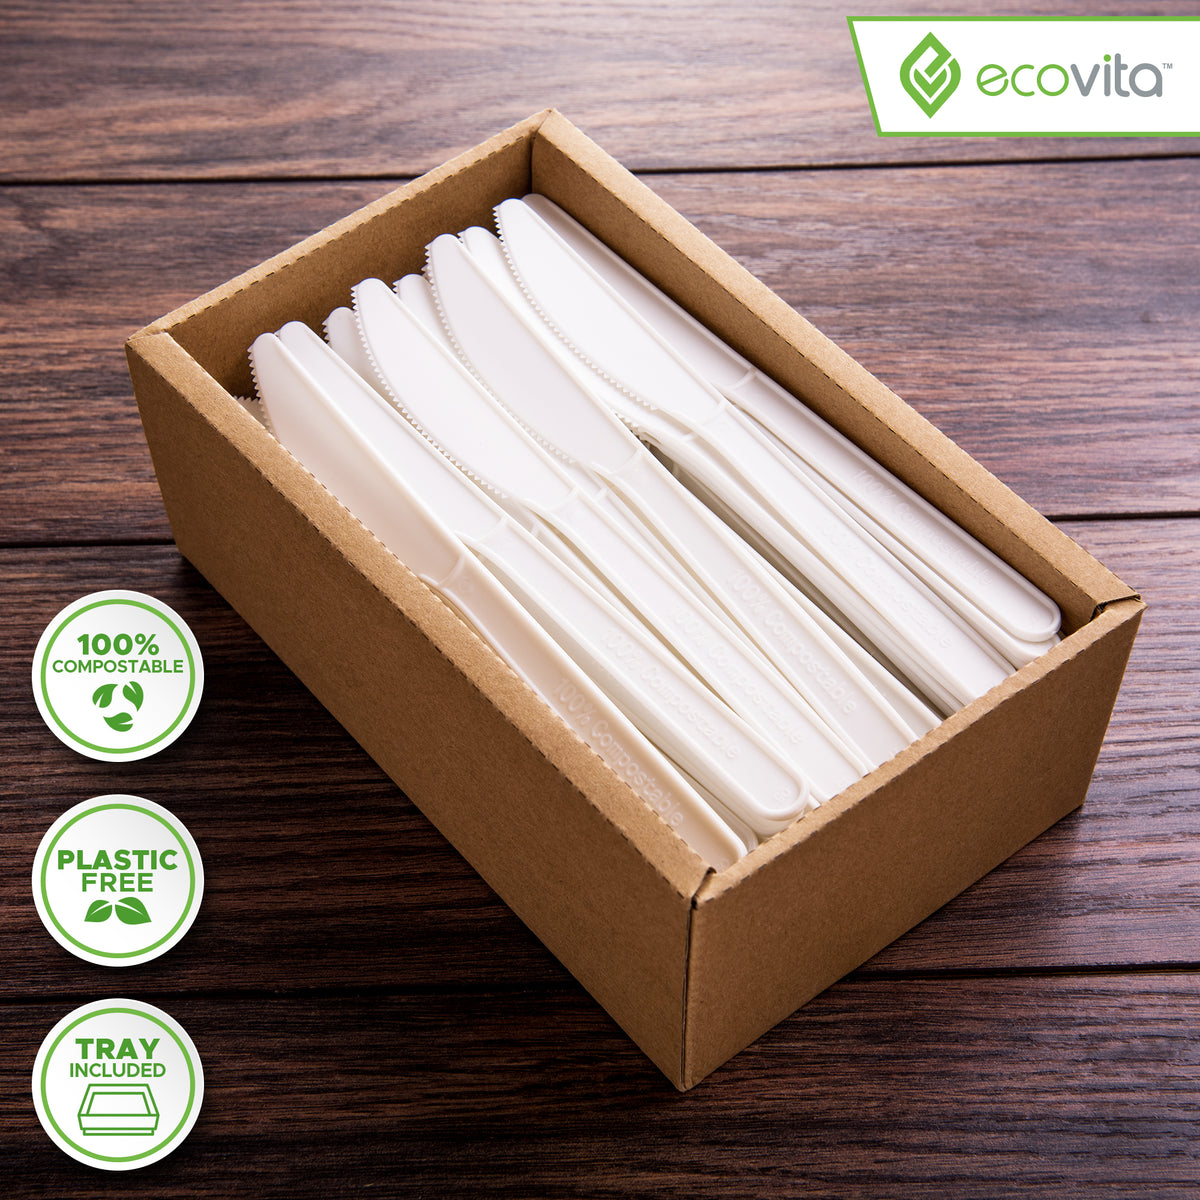 100% Compostable Knives - Disposable Eco Knife Utensil Sets - Eco Friendly Alternative to Plastic Knives, Size: 7.1 in